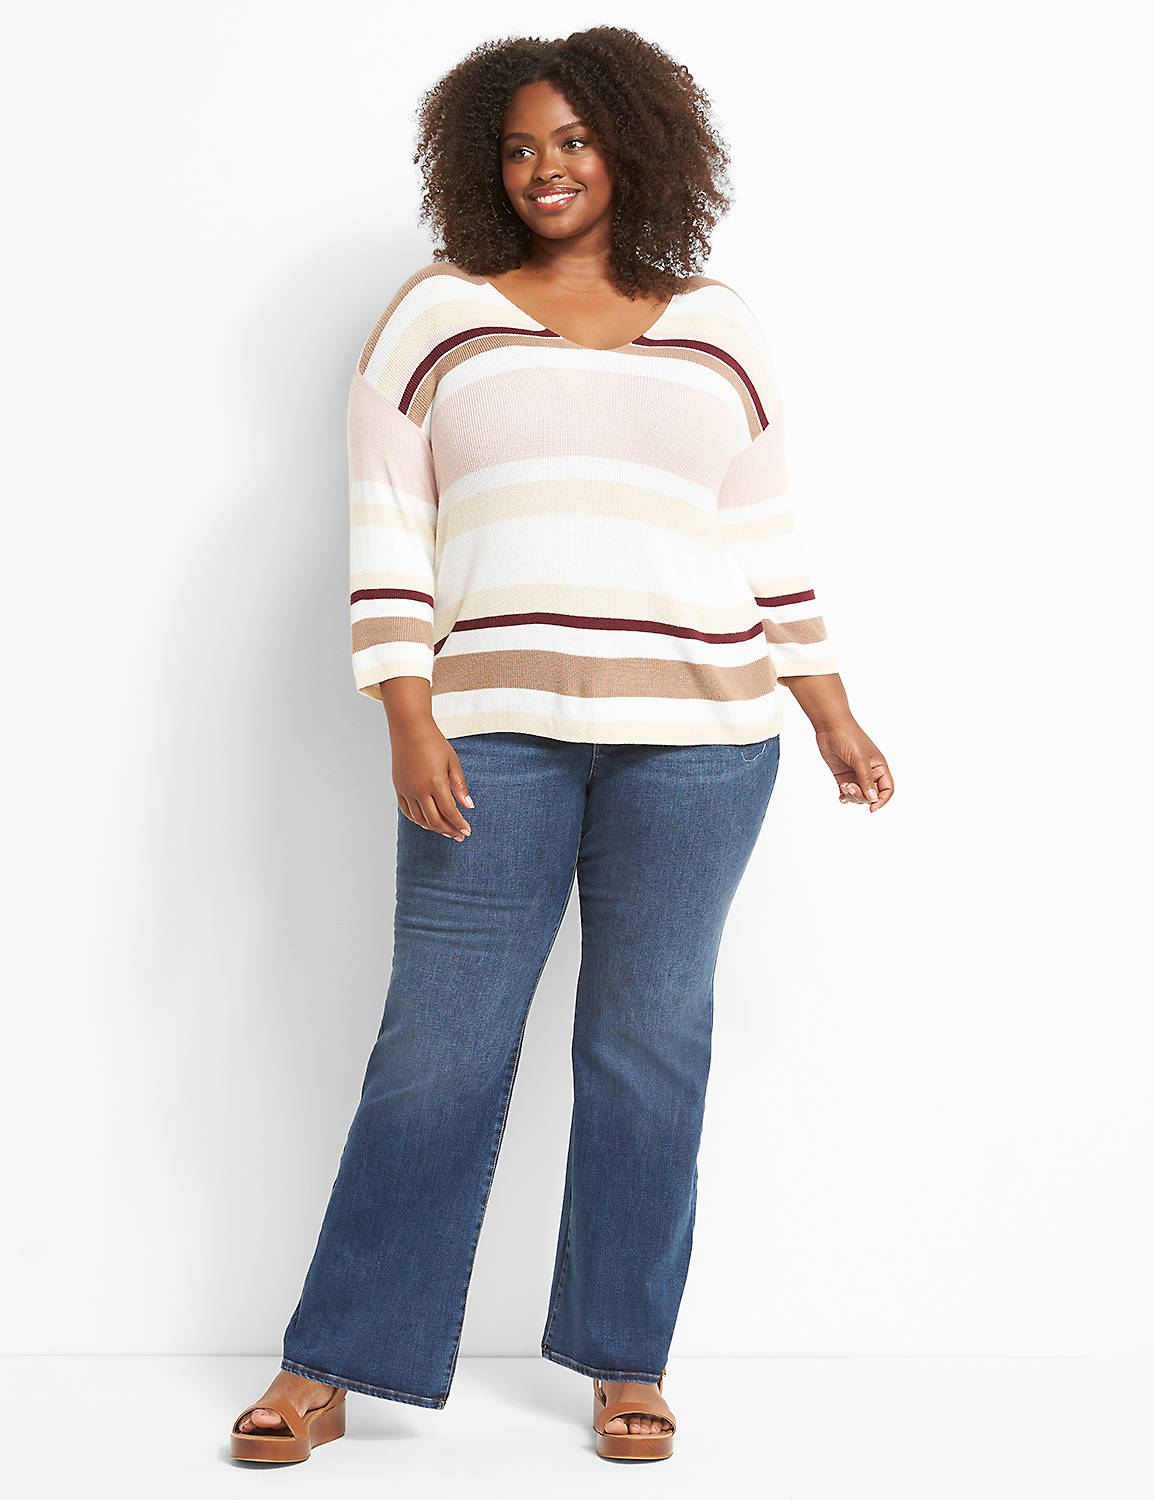 Striped 3/4-Sleeve Pullover Product Image 3